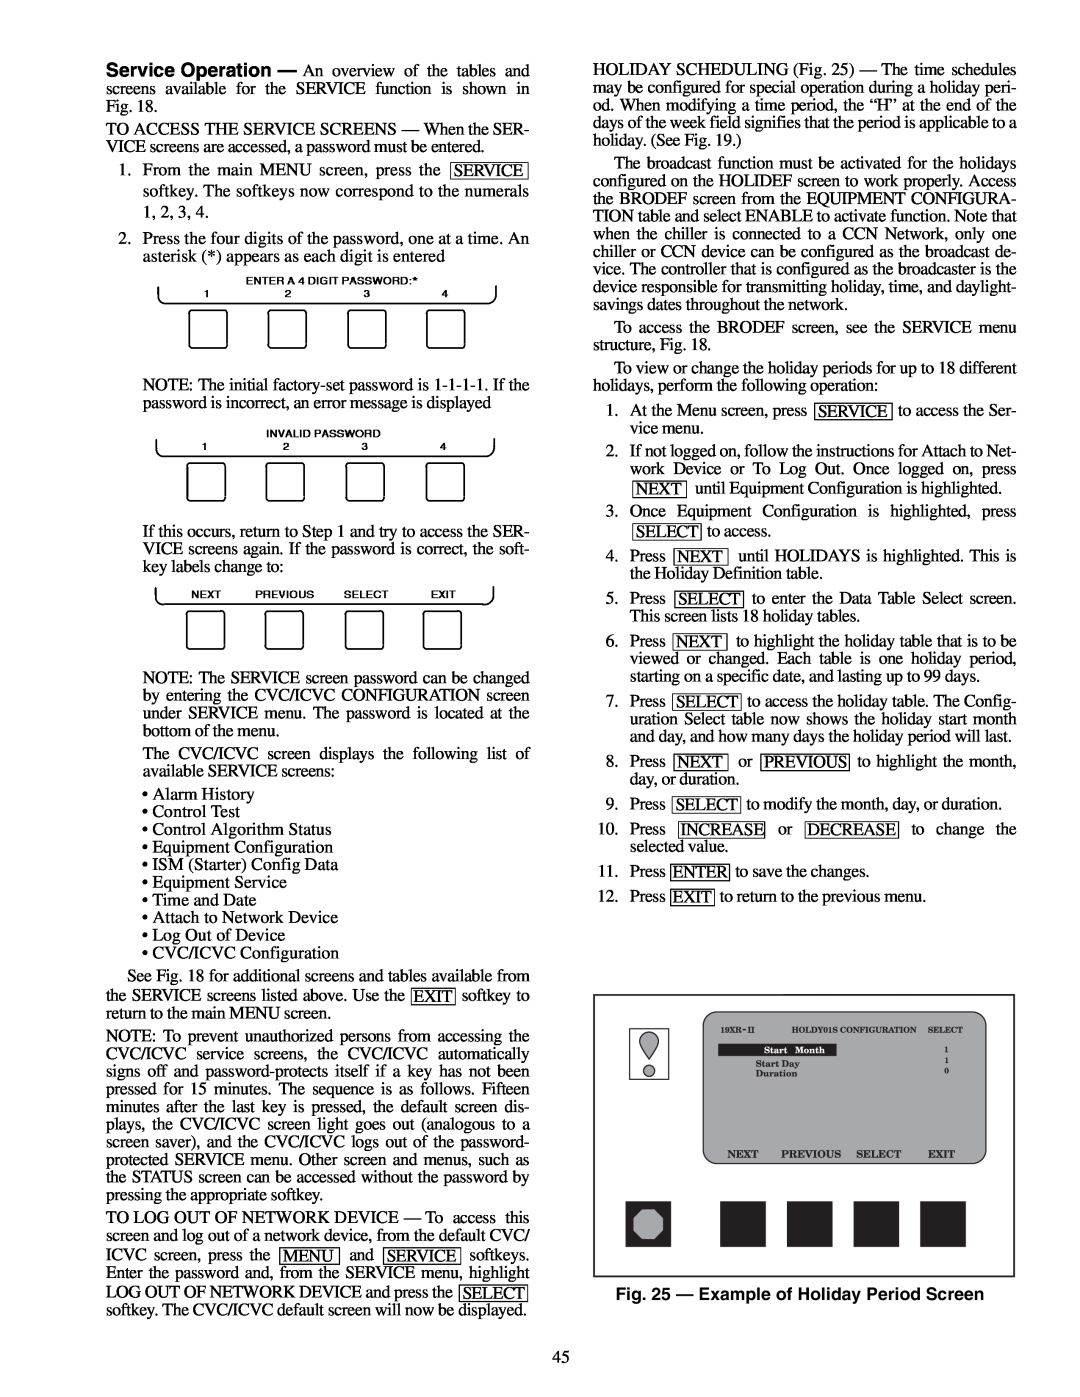 Carrier XRV, 19XR specifications Example of Holiday Period Screen 